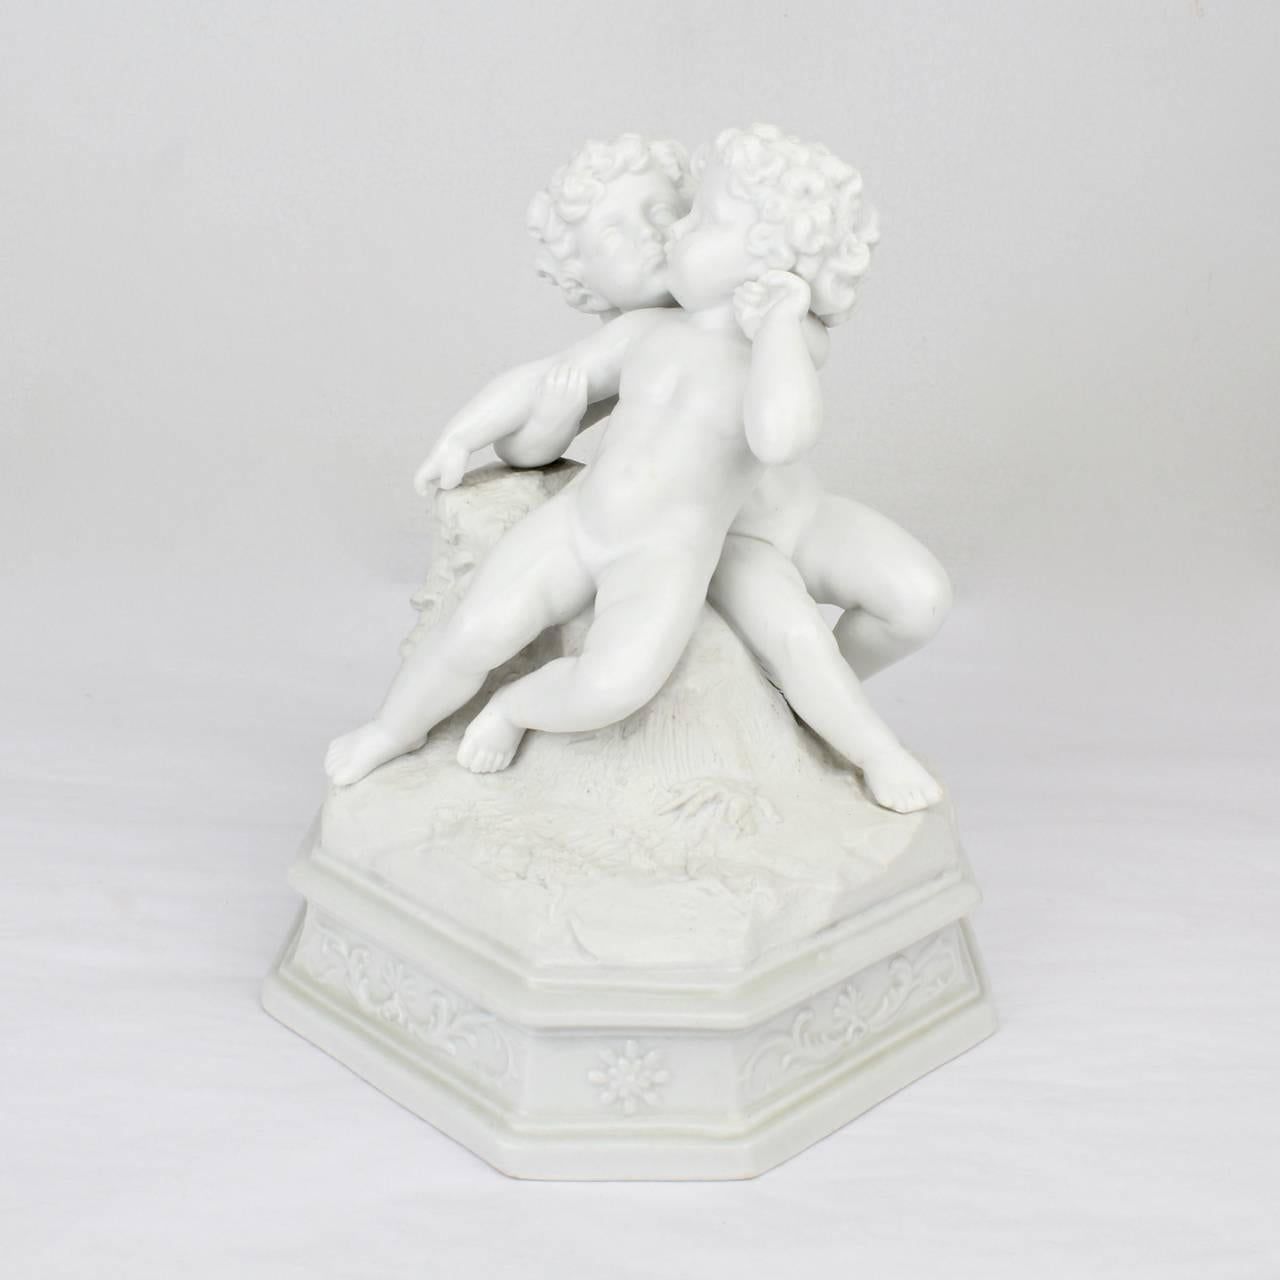 A wonderful antique 19th century figurine of two putti in an embrace - one putto wrapped in the other's arms with faces at a tenderly close distance.

Likely French with a glazed plinth and bisque top. 

Base unmarked.

Measure: Height ca. 6